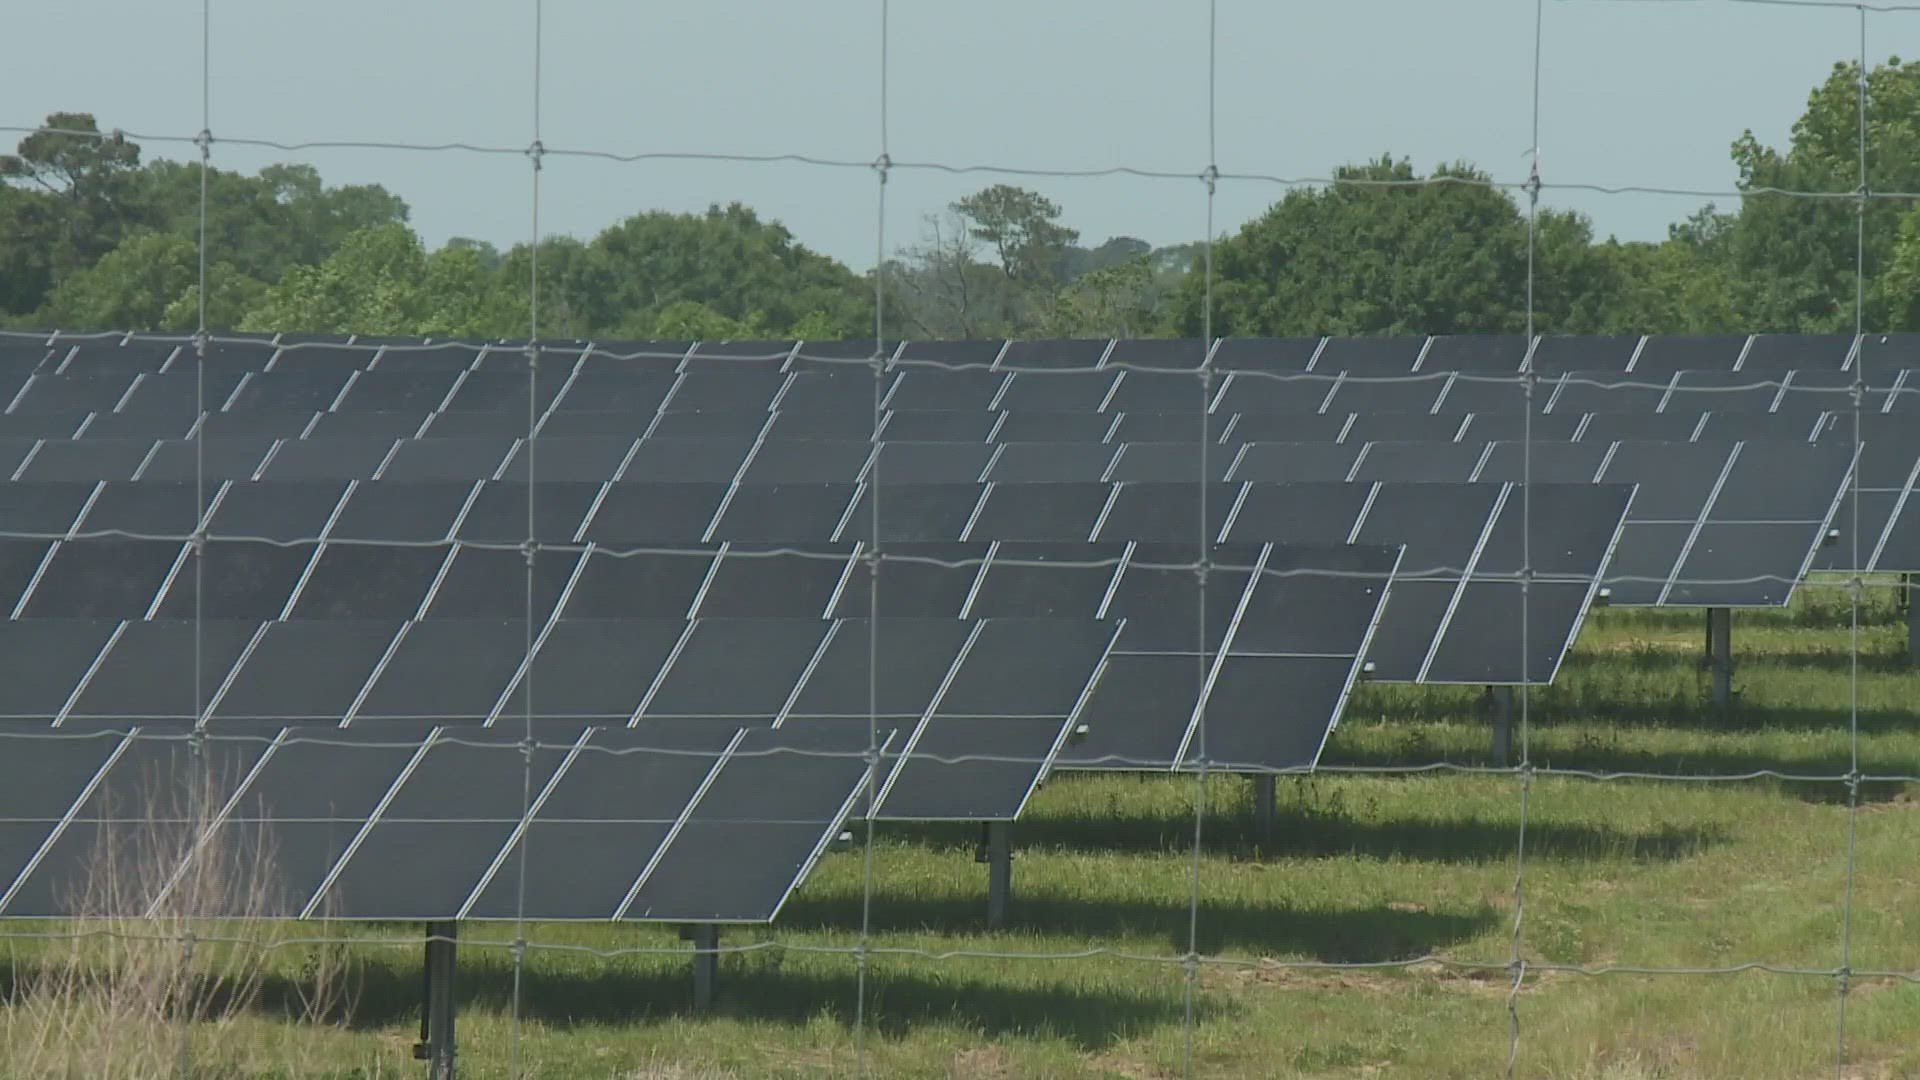 Seven solar farms in the state are now sending electricity to Entergy customers in New Orleans and across Louisiana.